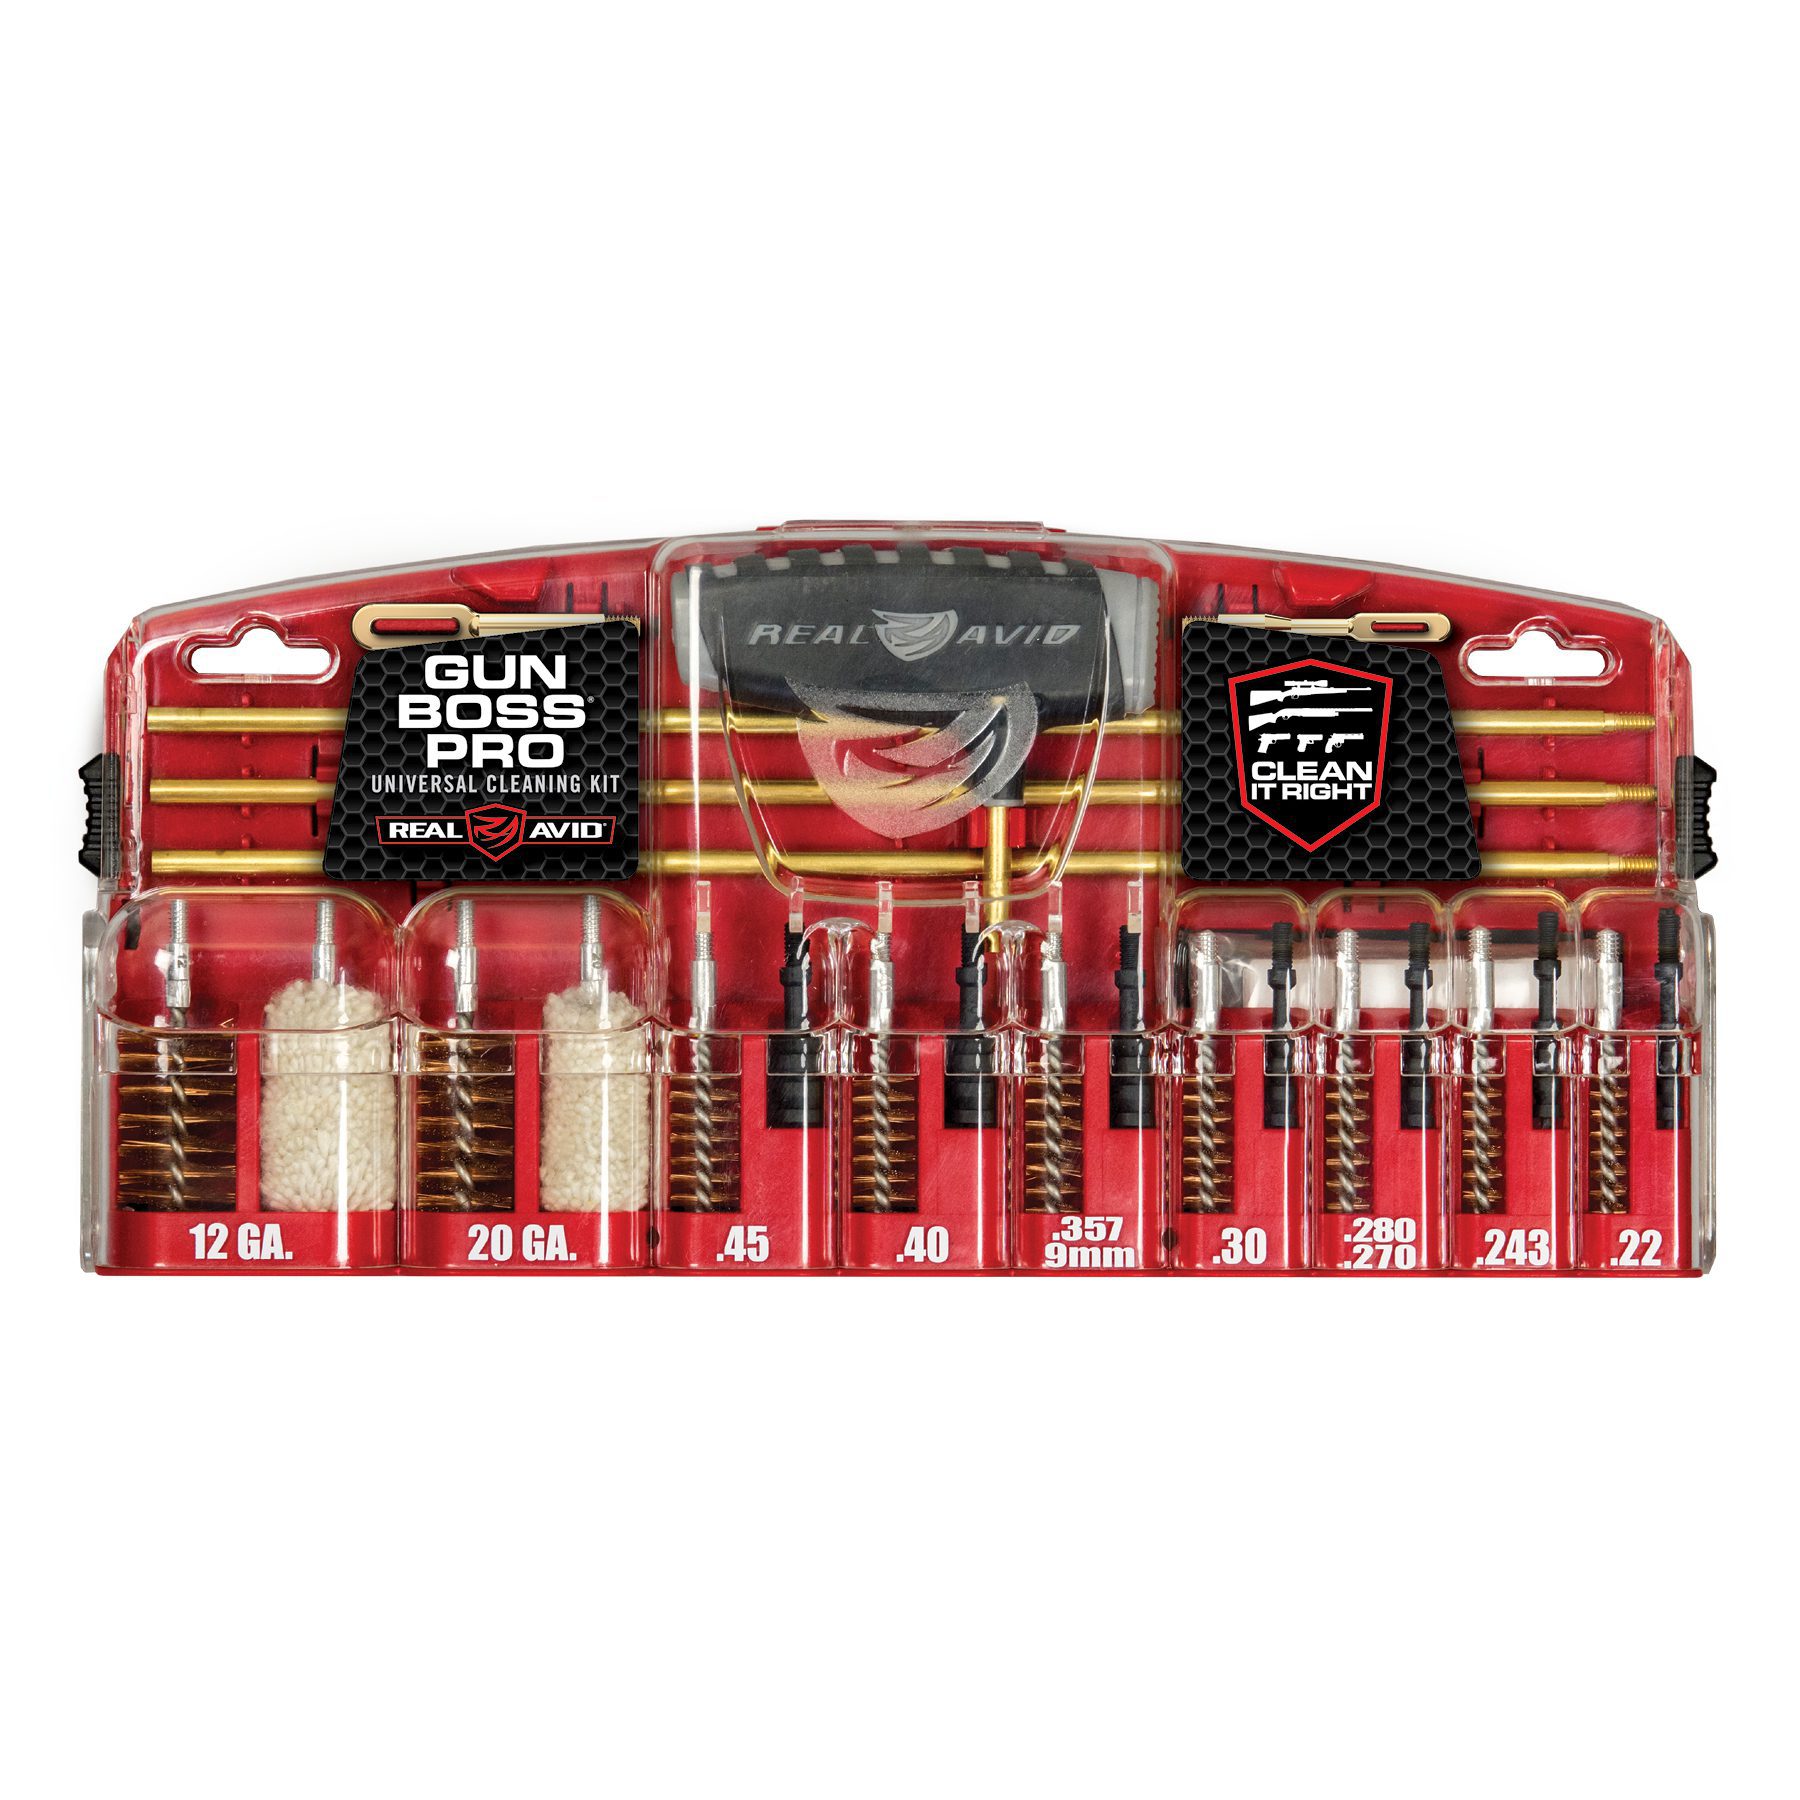 the ultimate gun cleaning kit includes all kinds of tools